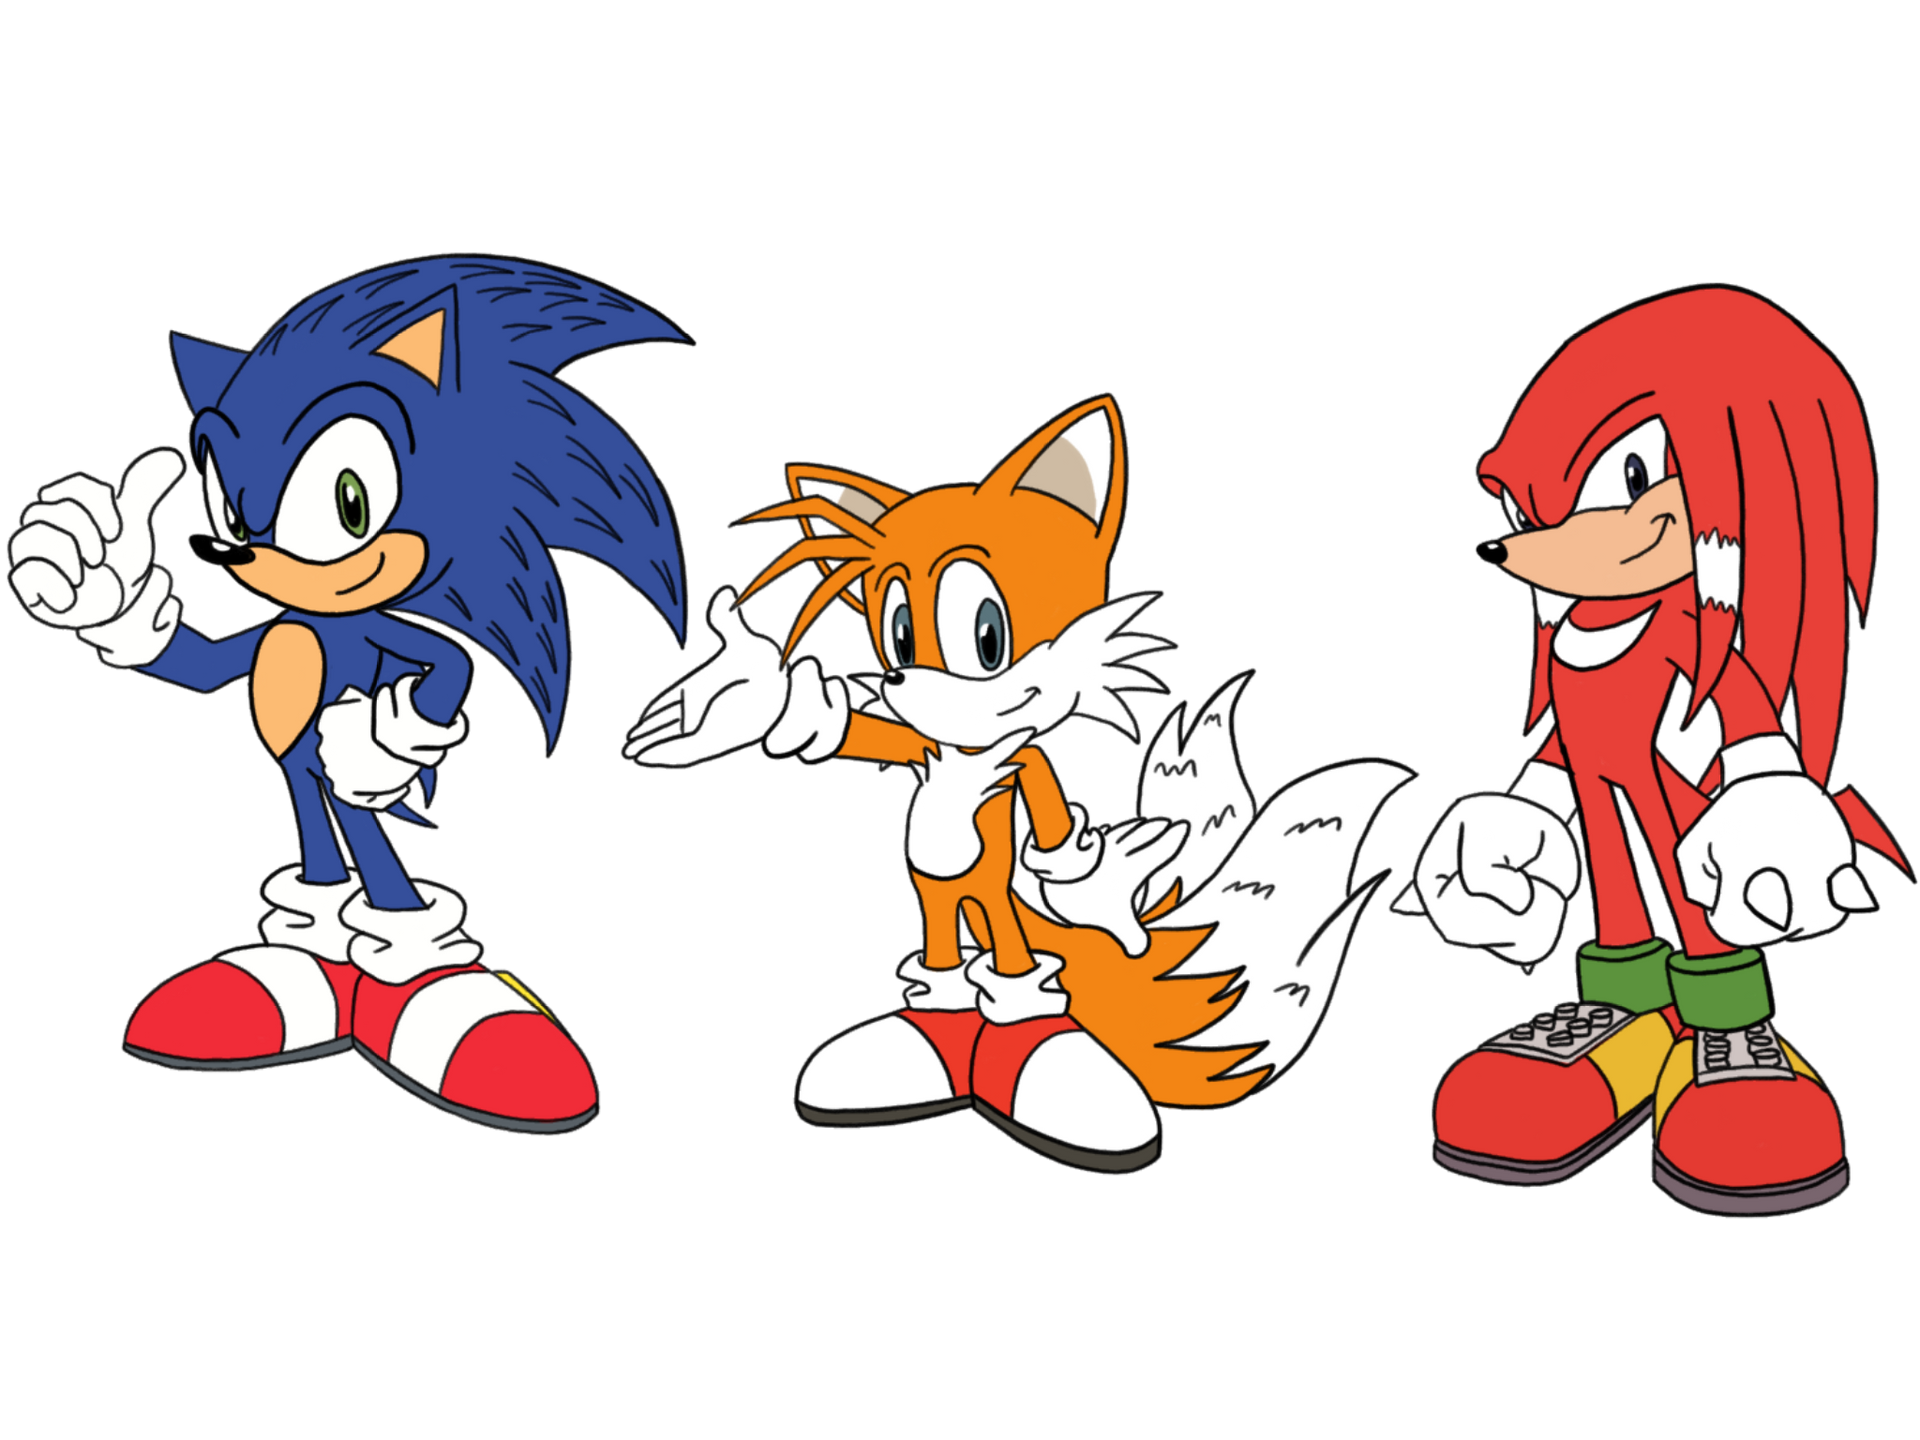 here have some pngs of tails and knuckles on the sonic movie 2 set :  r/SonicTheHedgehog